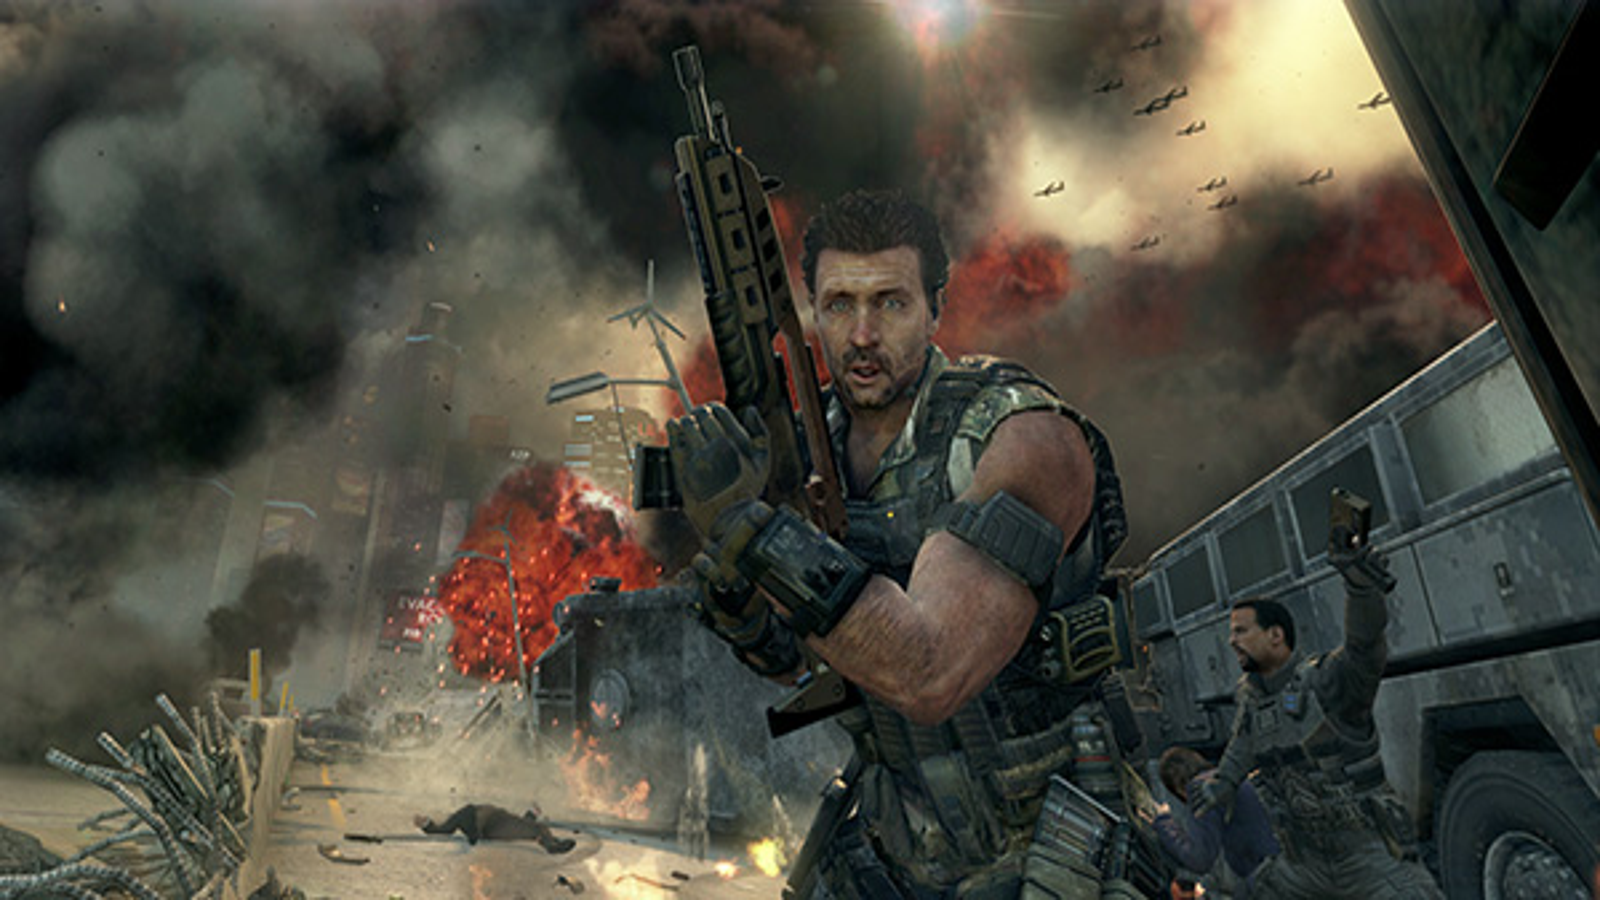 Call of Duty: Modern Warfare 2 Multiplayer Review: Refined Yet Mindless Fun